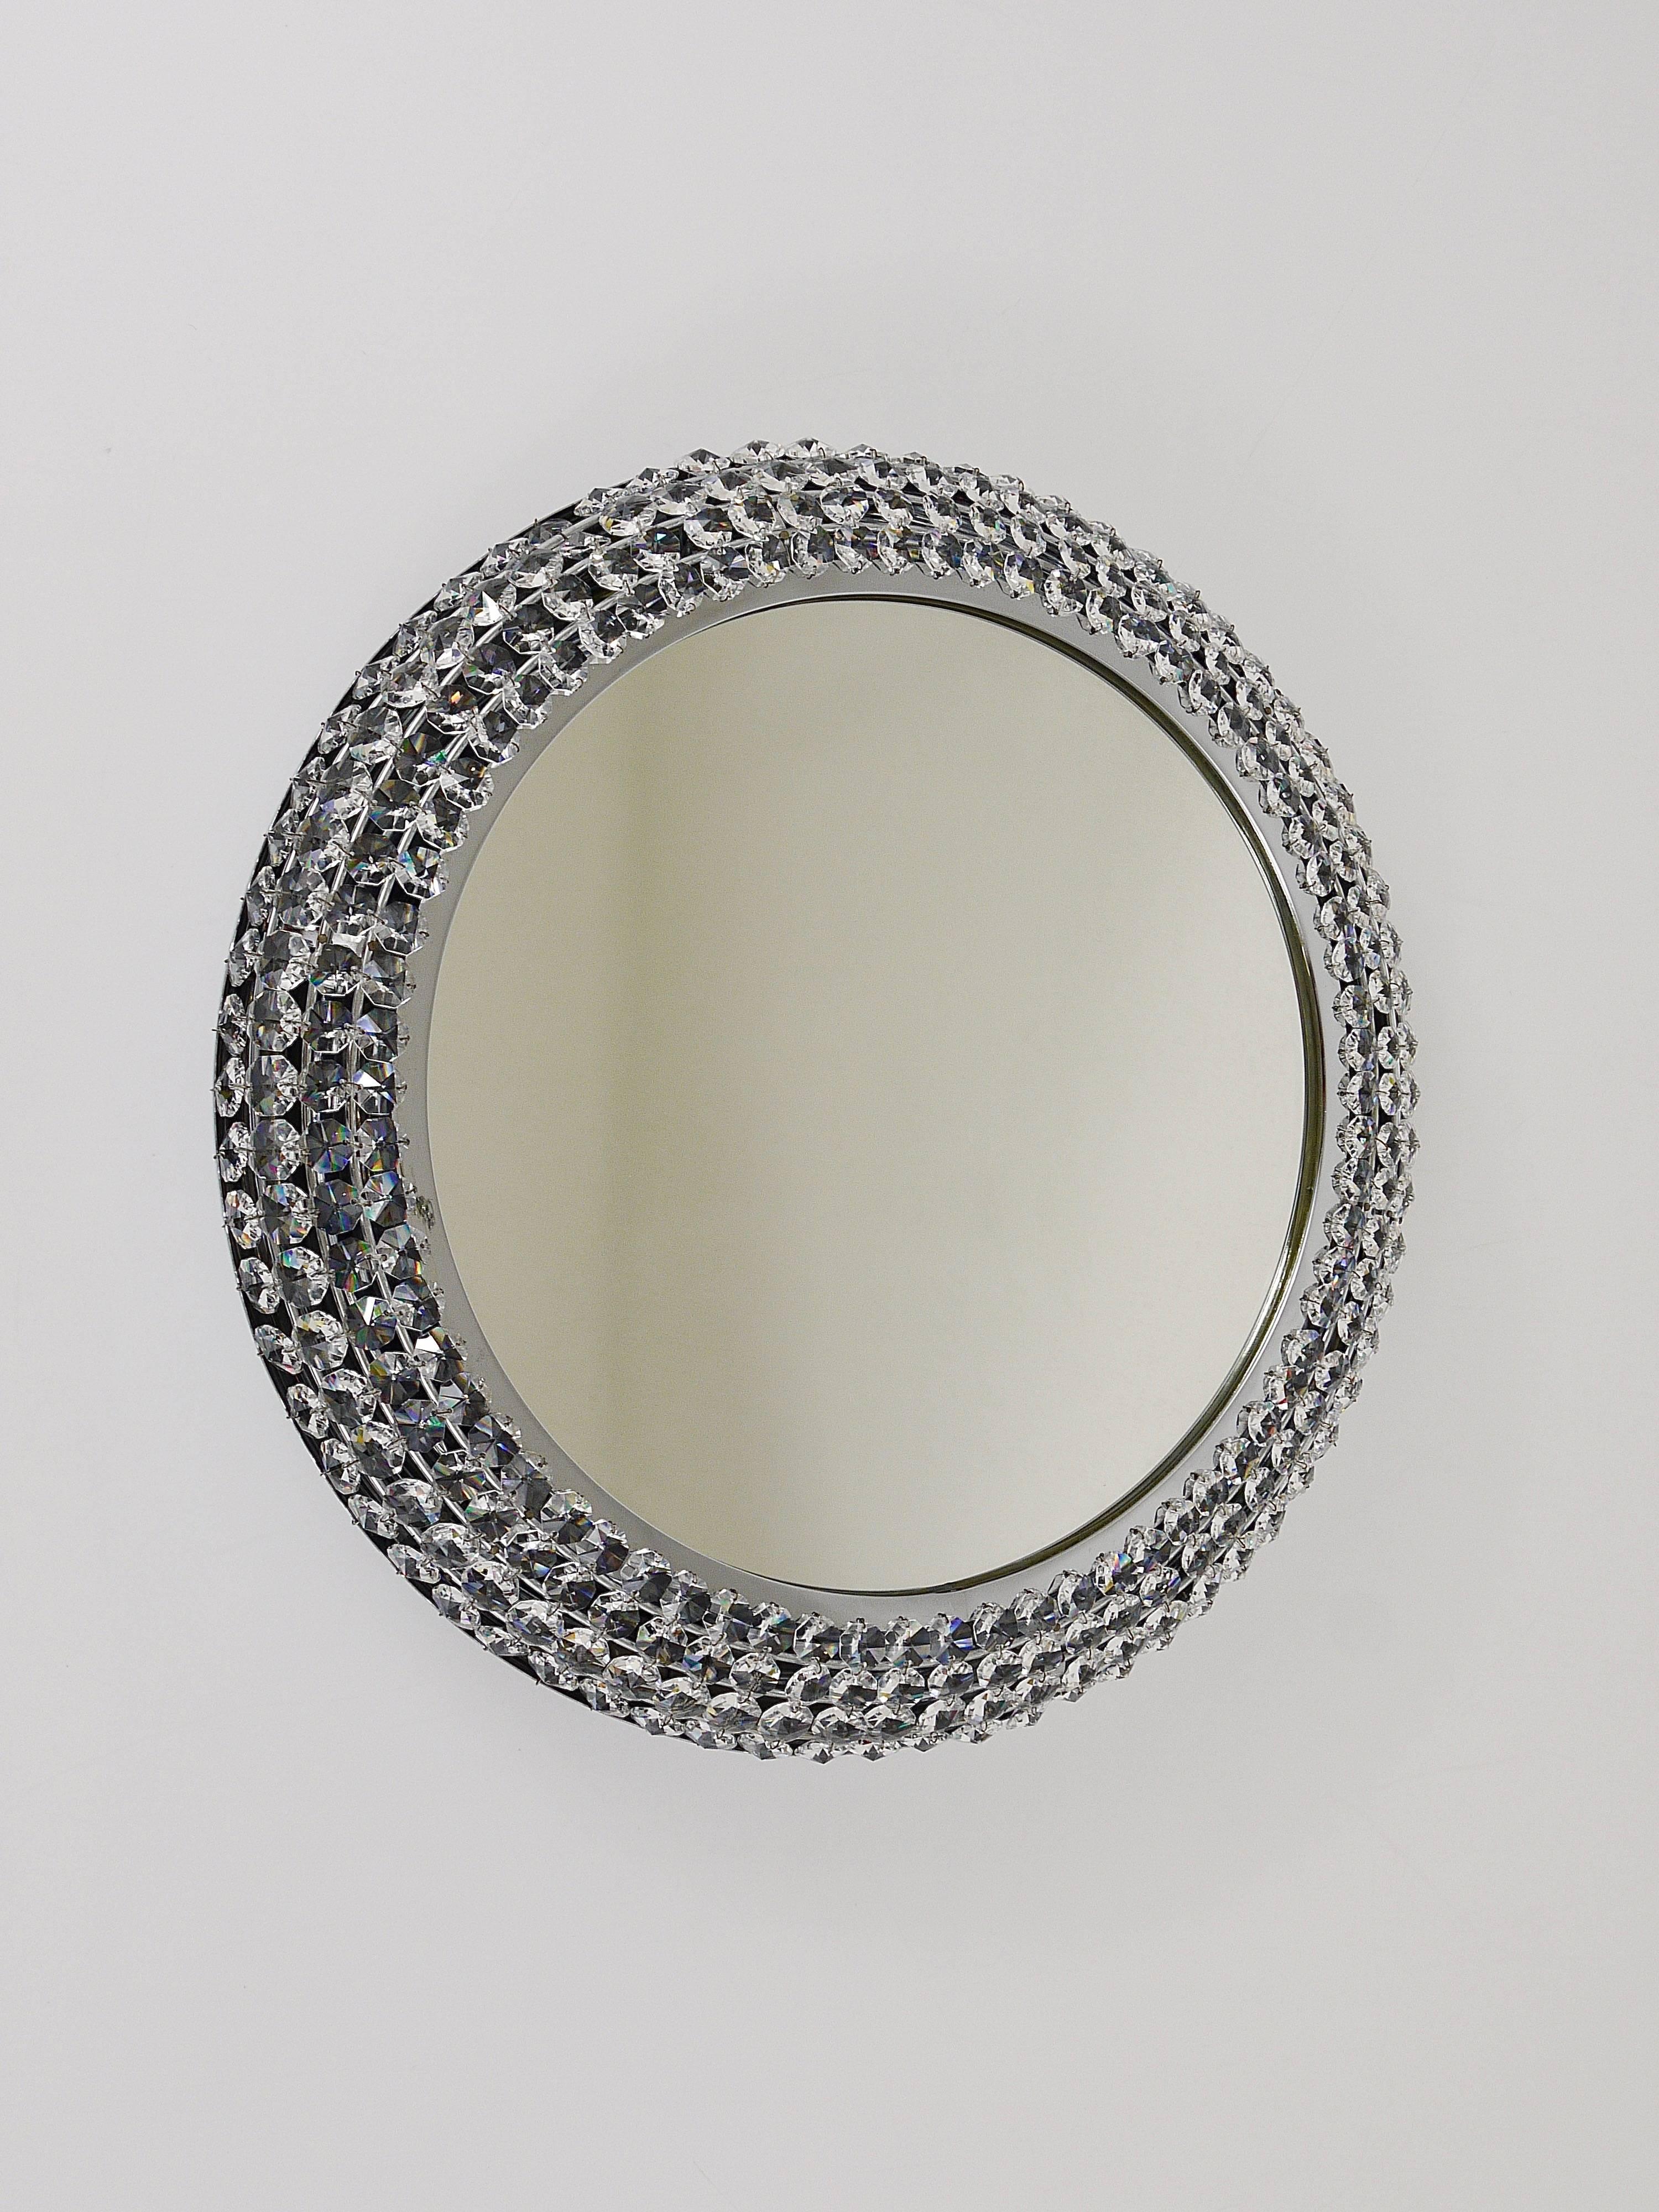 Round Chromed Crystal Backlit Wall Mirror, Austria, 1960s For Sale 1